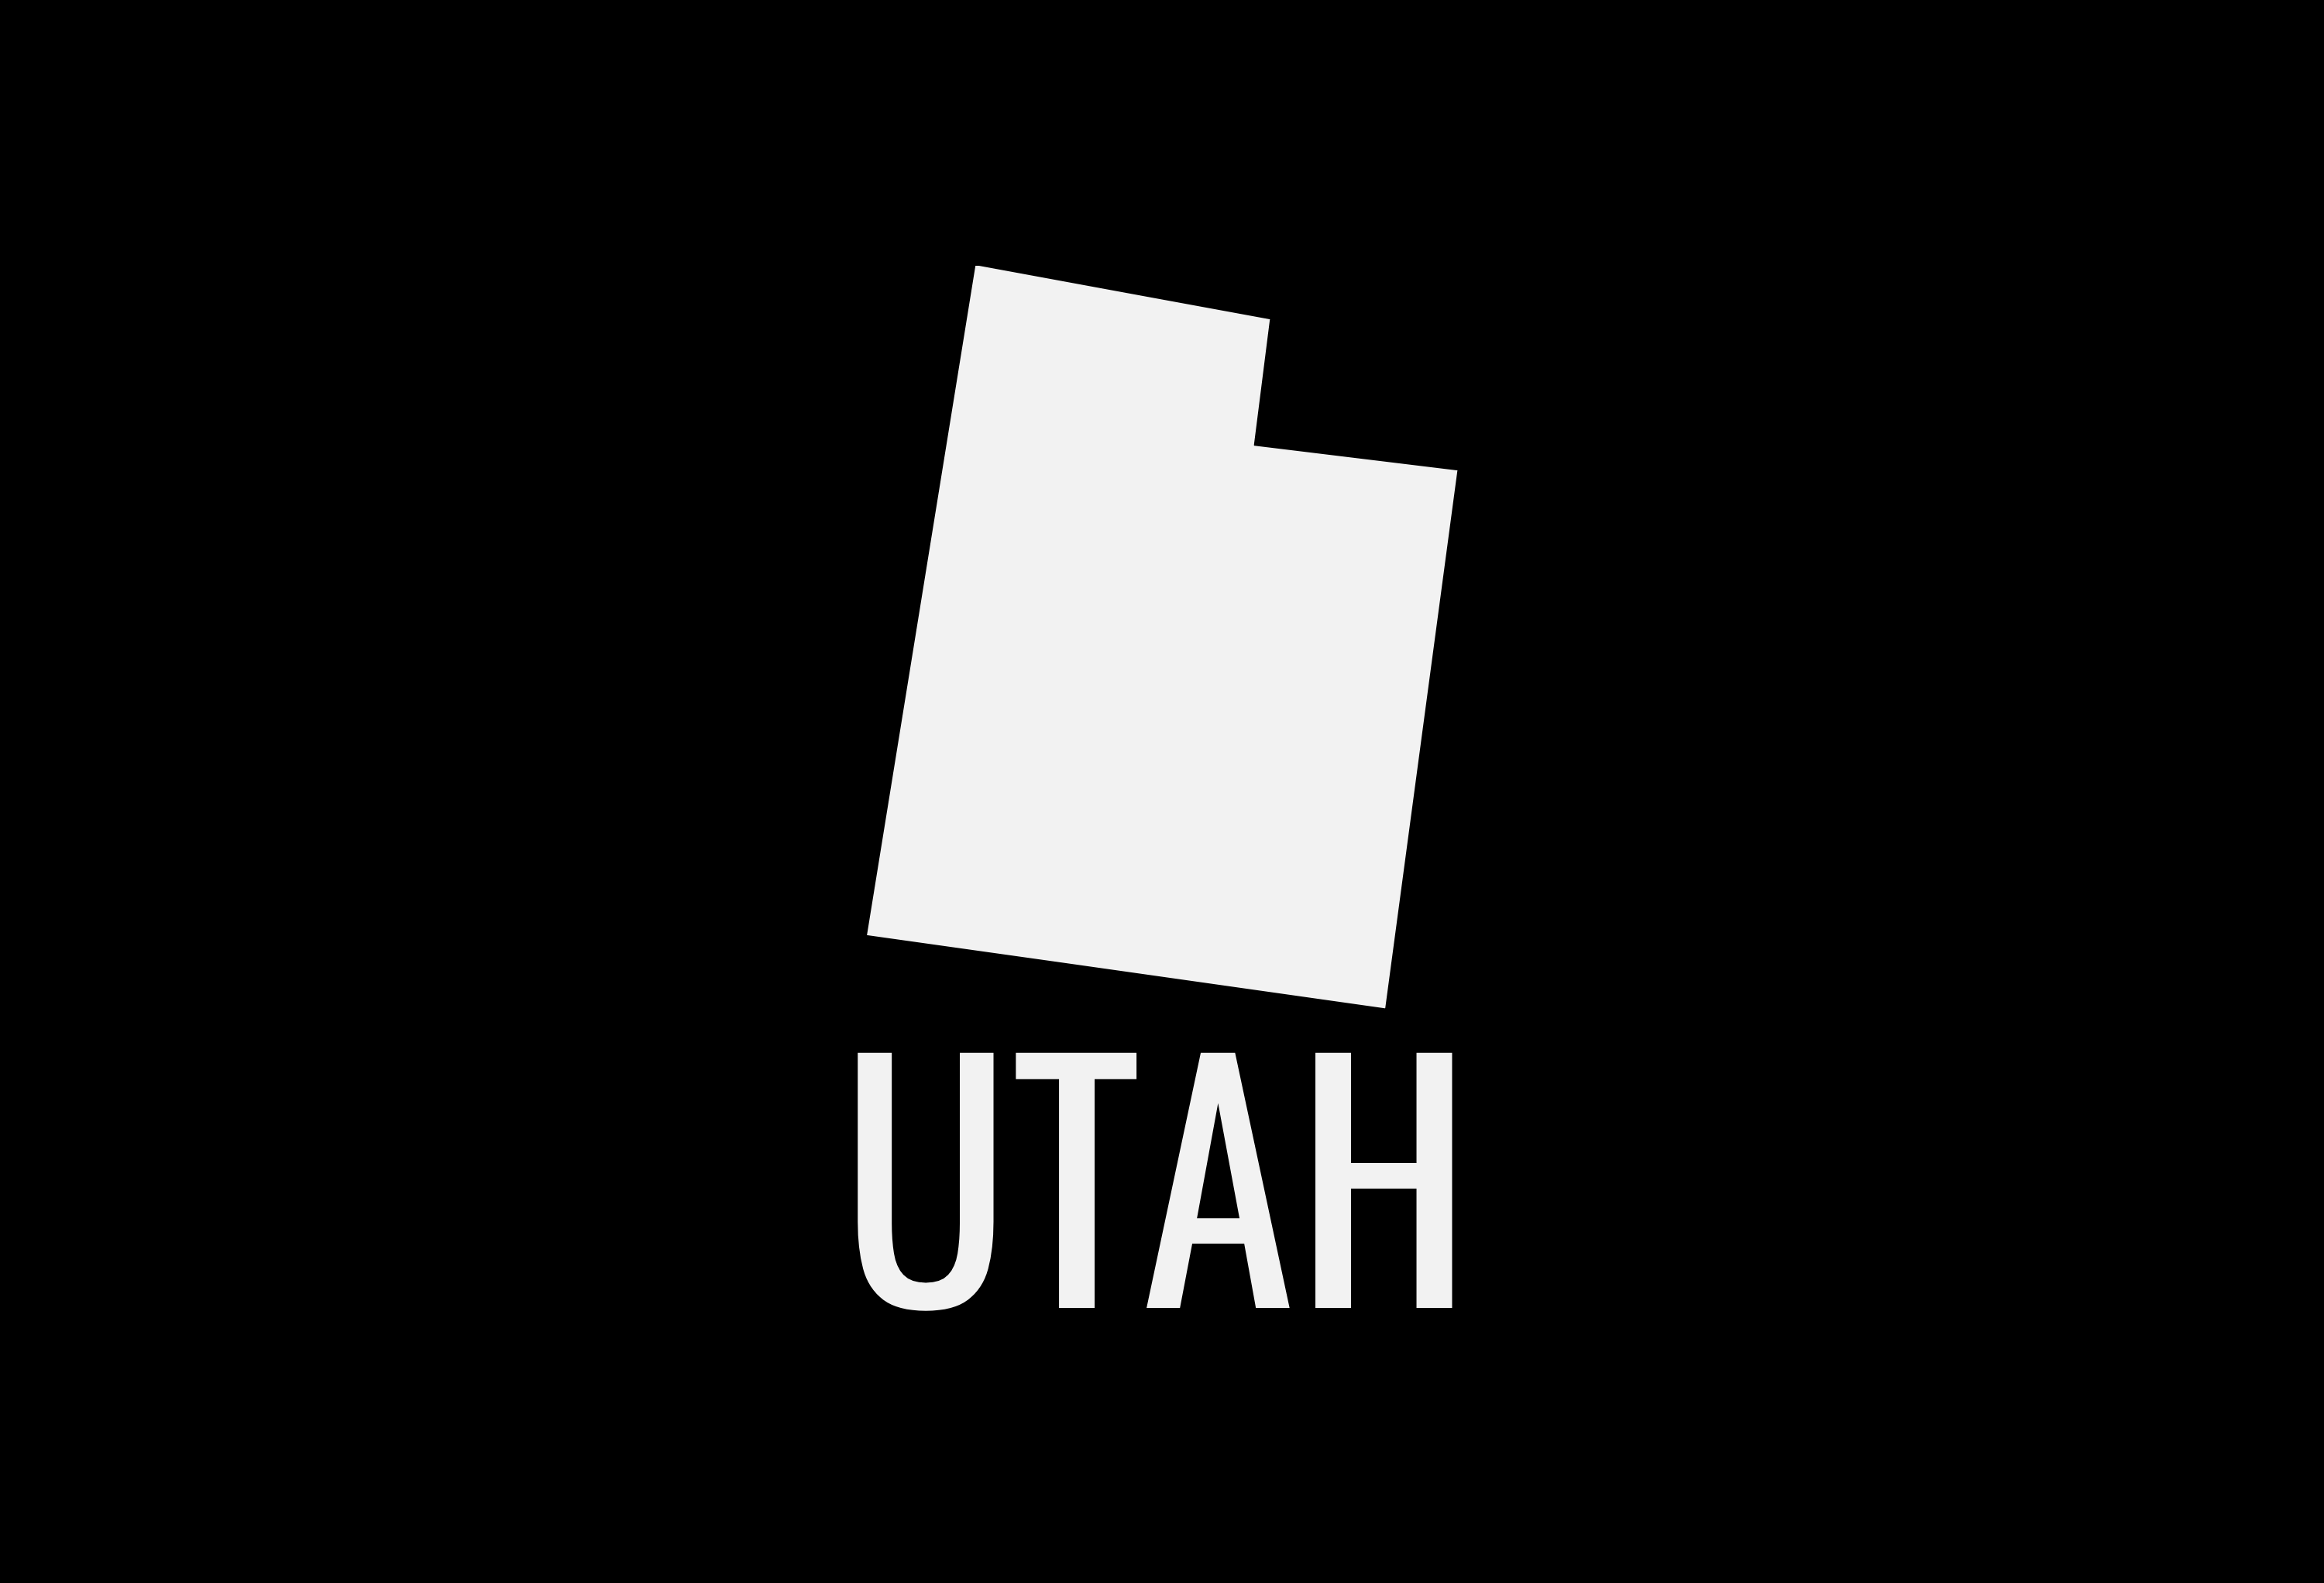 Utah State Map Car Decal - Permanent Vinyl Sticker for Cars, Vehicle, Doors, Windows, Laptop, and more!